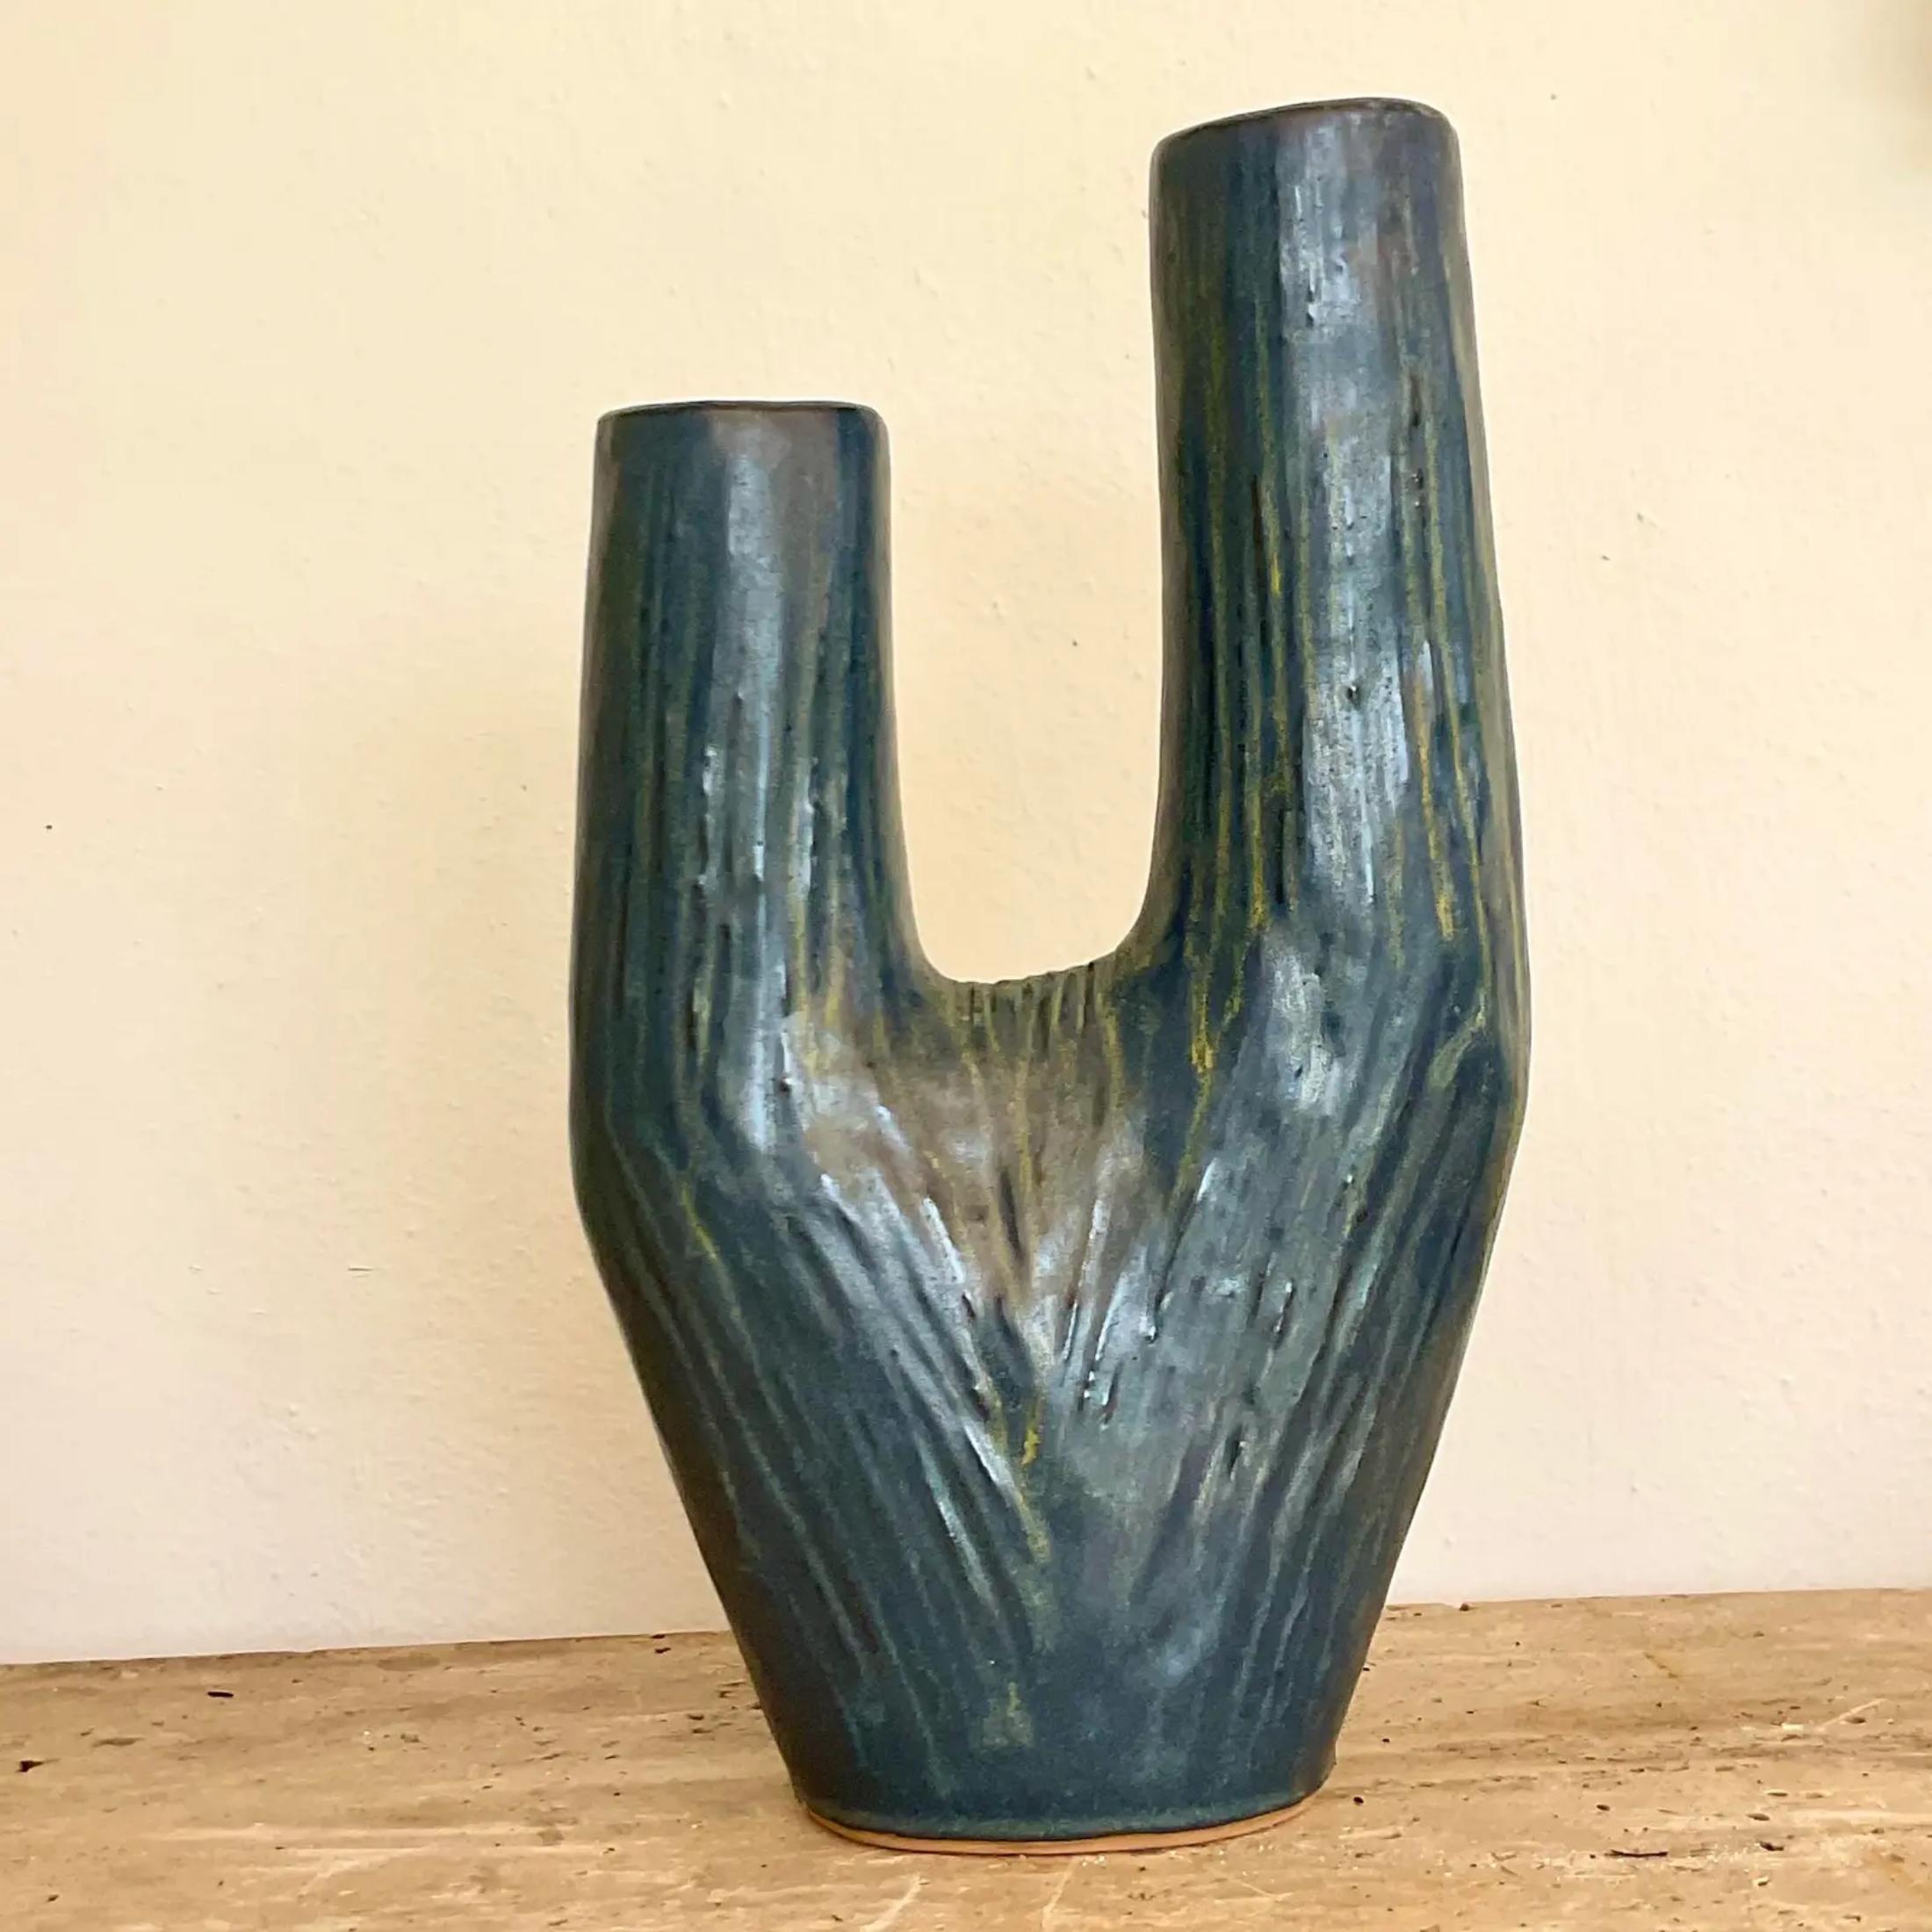 A fabulous ceramic table vase in a unique shade or grey-blue that could hold your favorite flowers. Acquired at a Palm Beach Estate